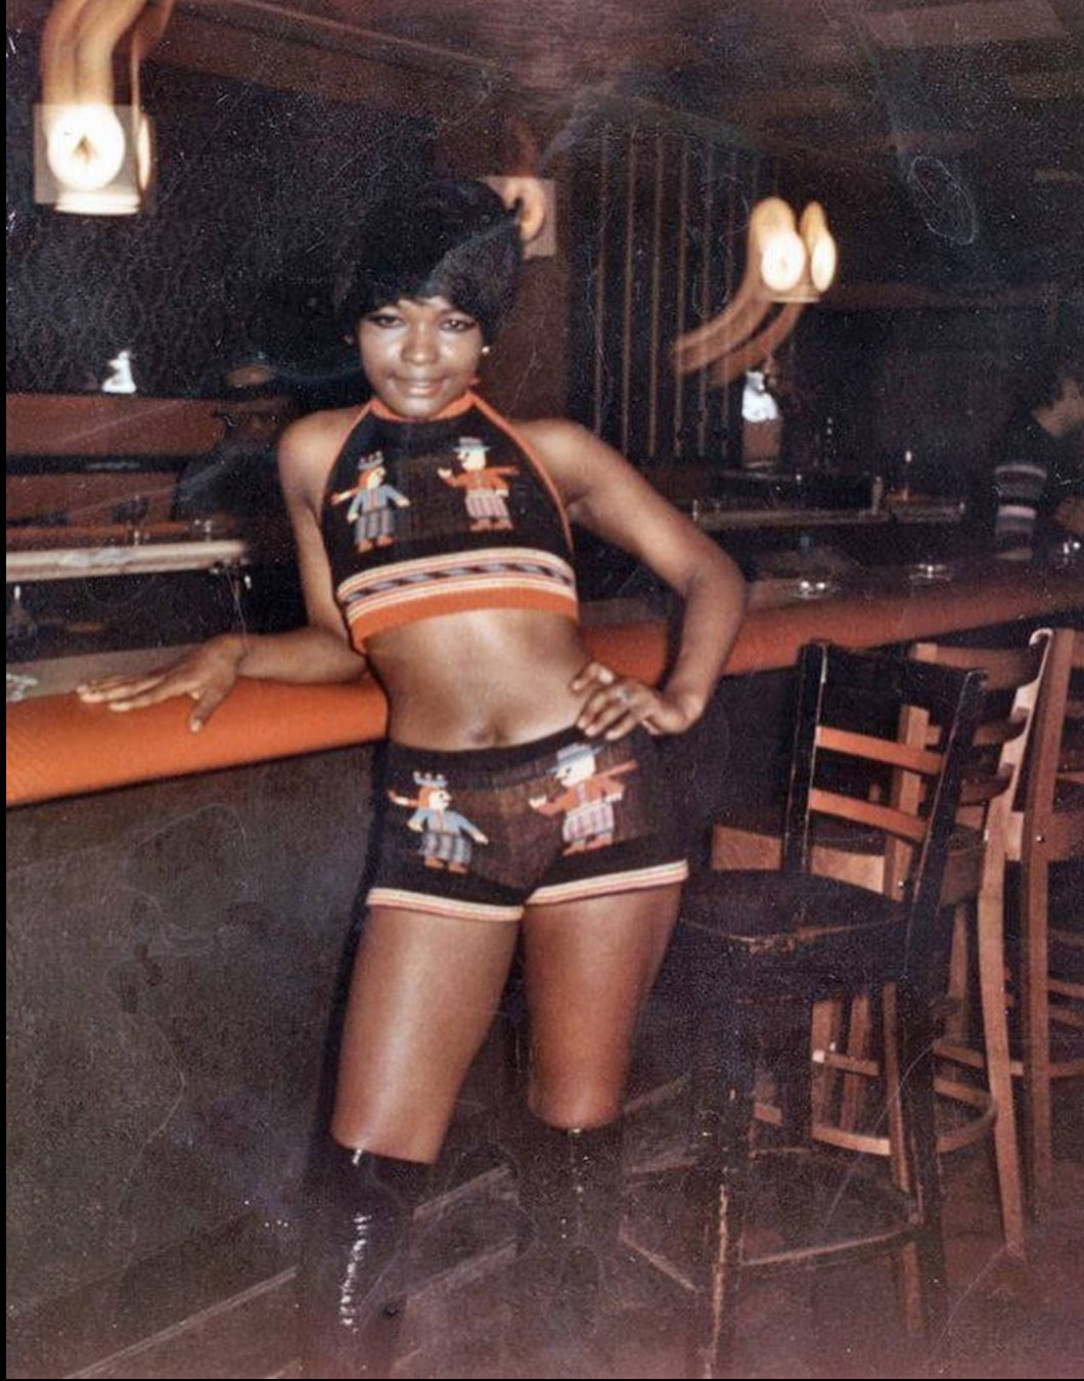 Waitress at The Highland Tap in Boston, 1968